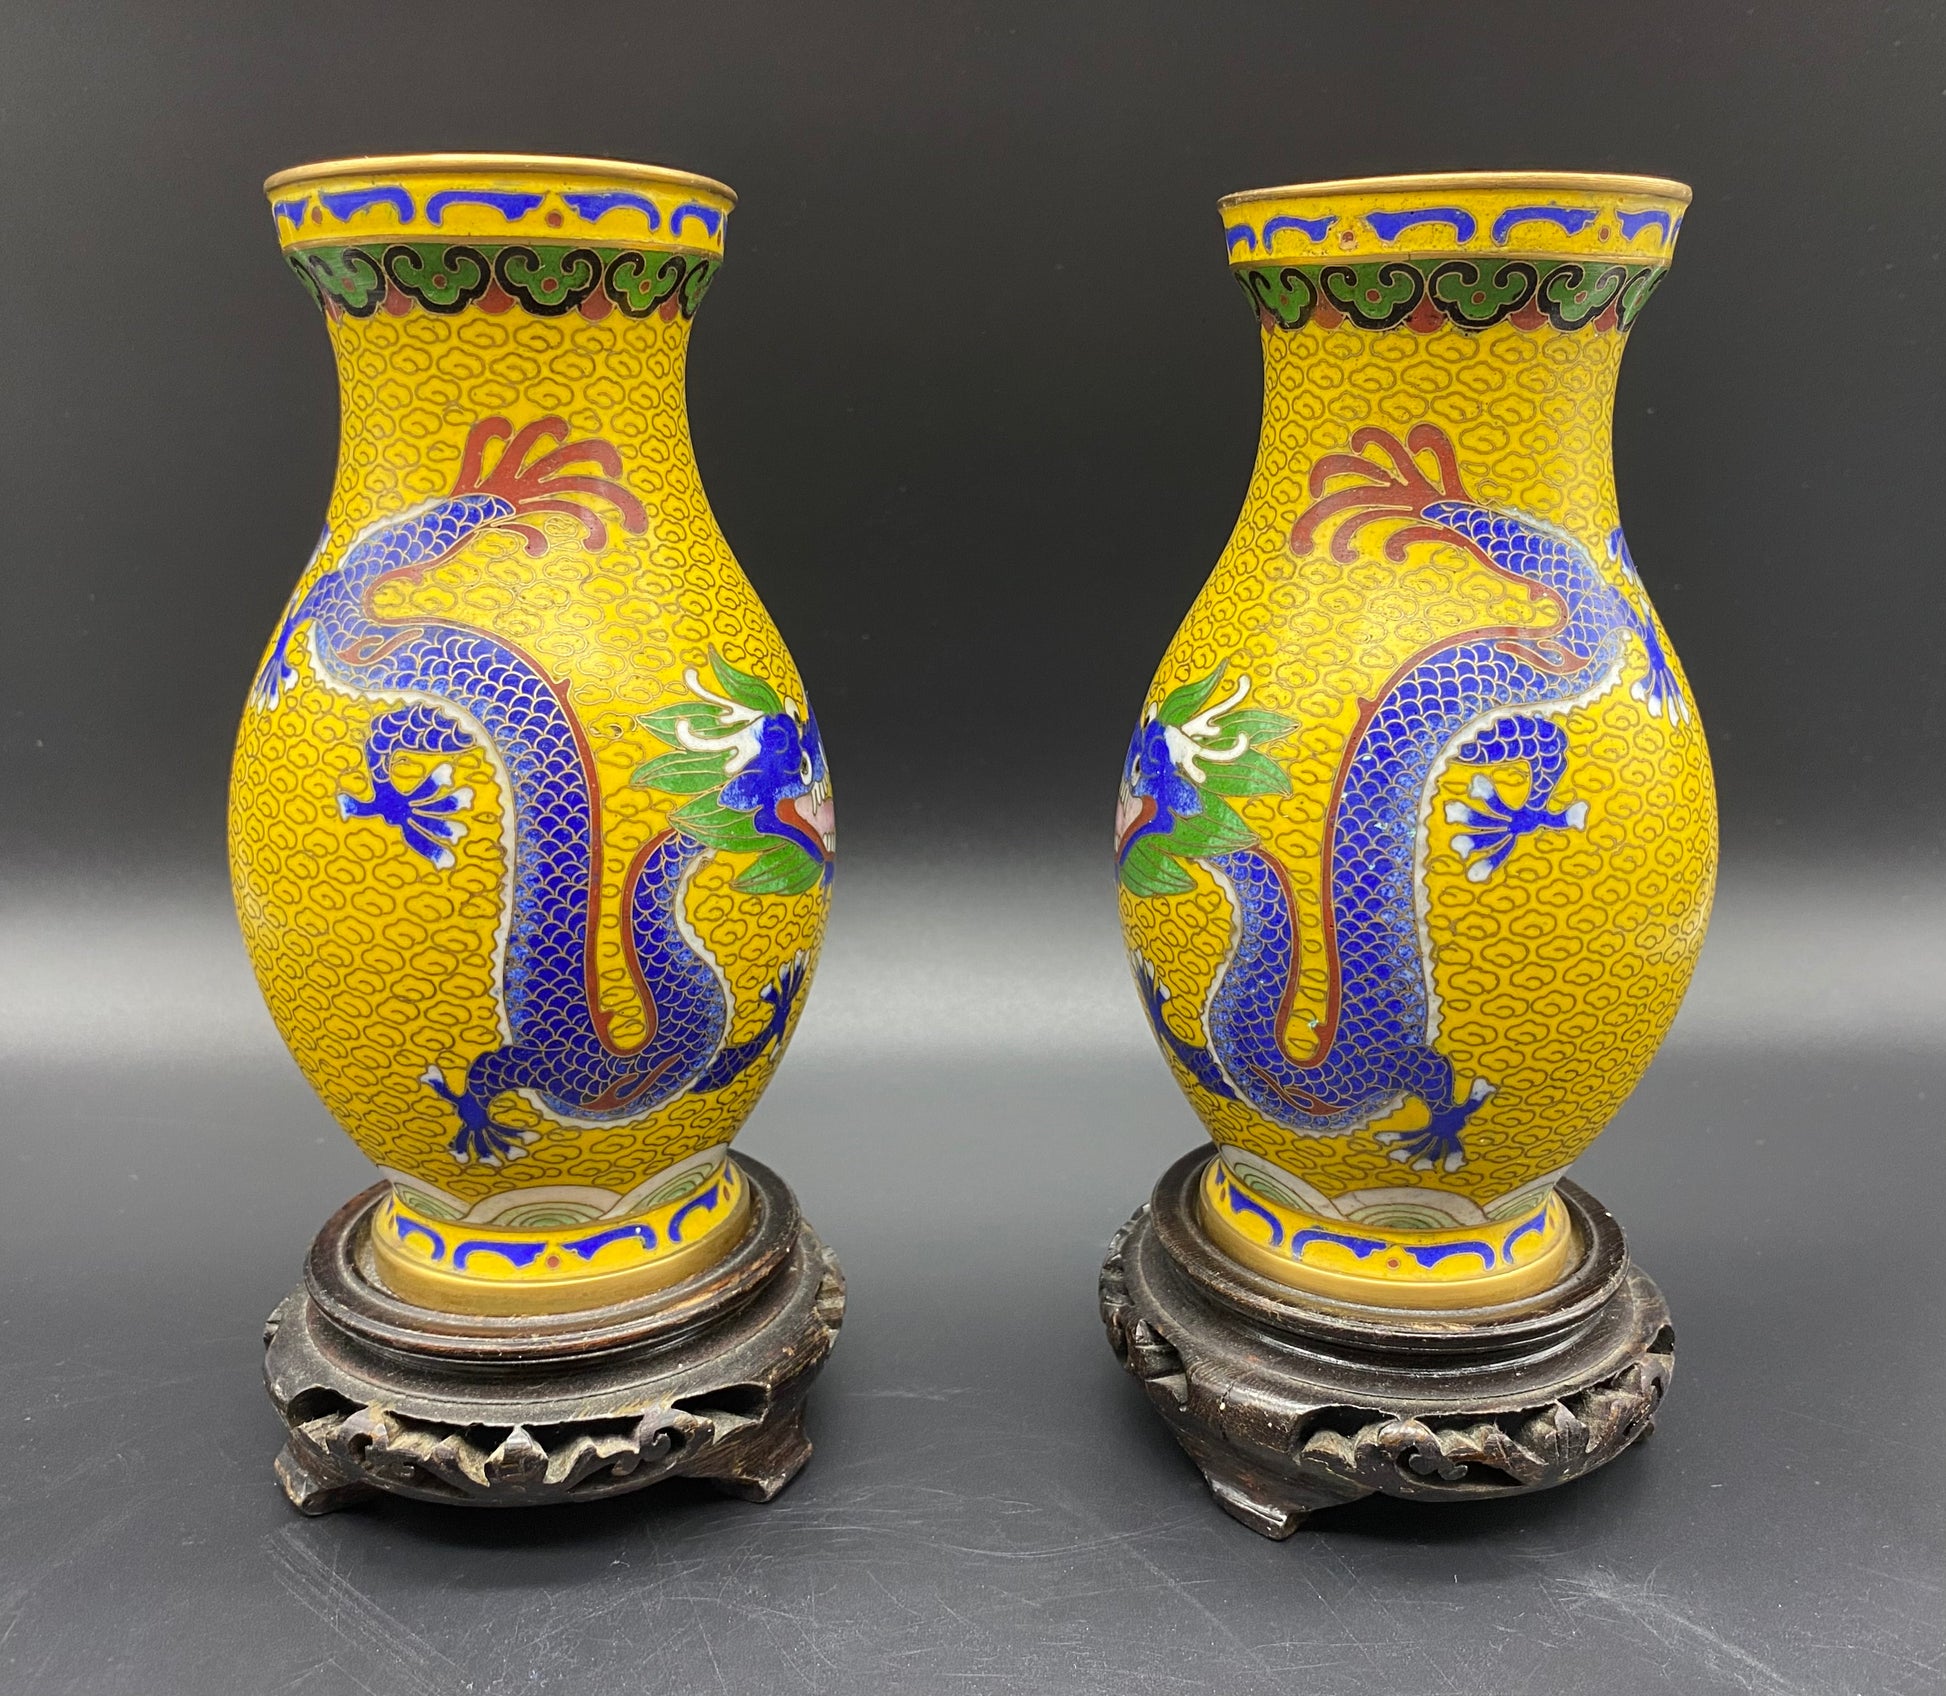 KB ANTIQUES & JEWELLERY - A very few cloisonné objects have been dated on stylistic grounds to the Yongle reign (1403–24) of the early Ming dynasty.